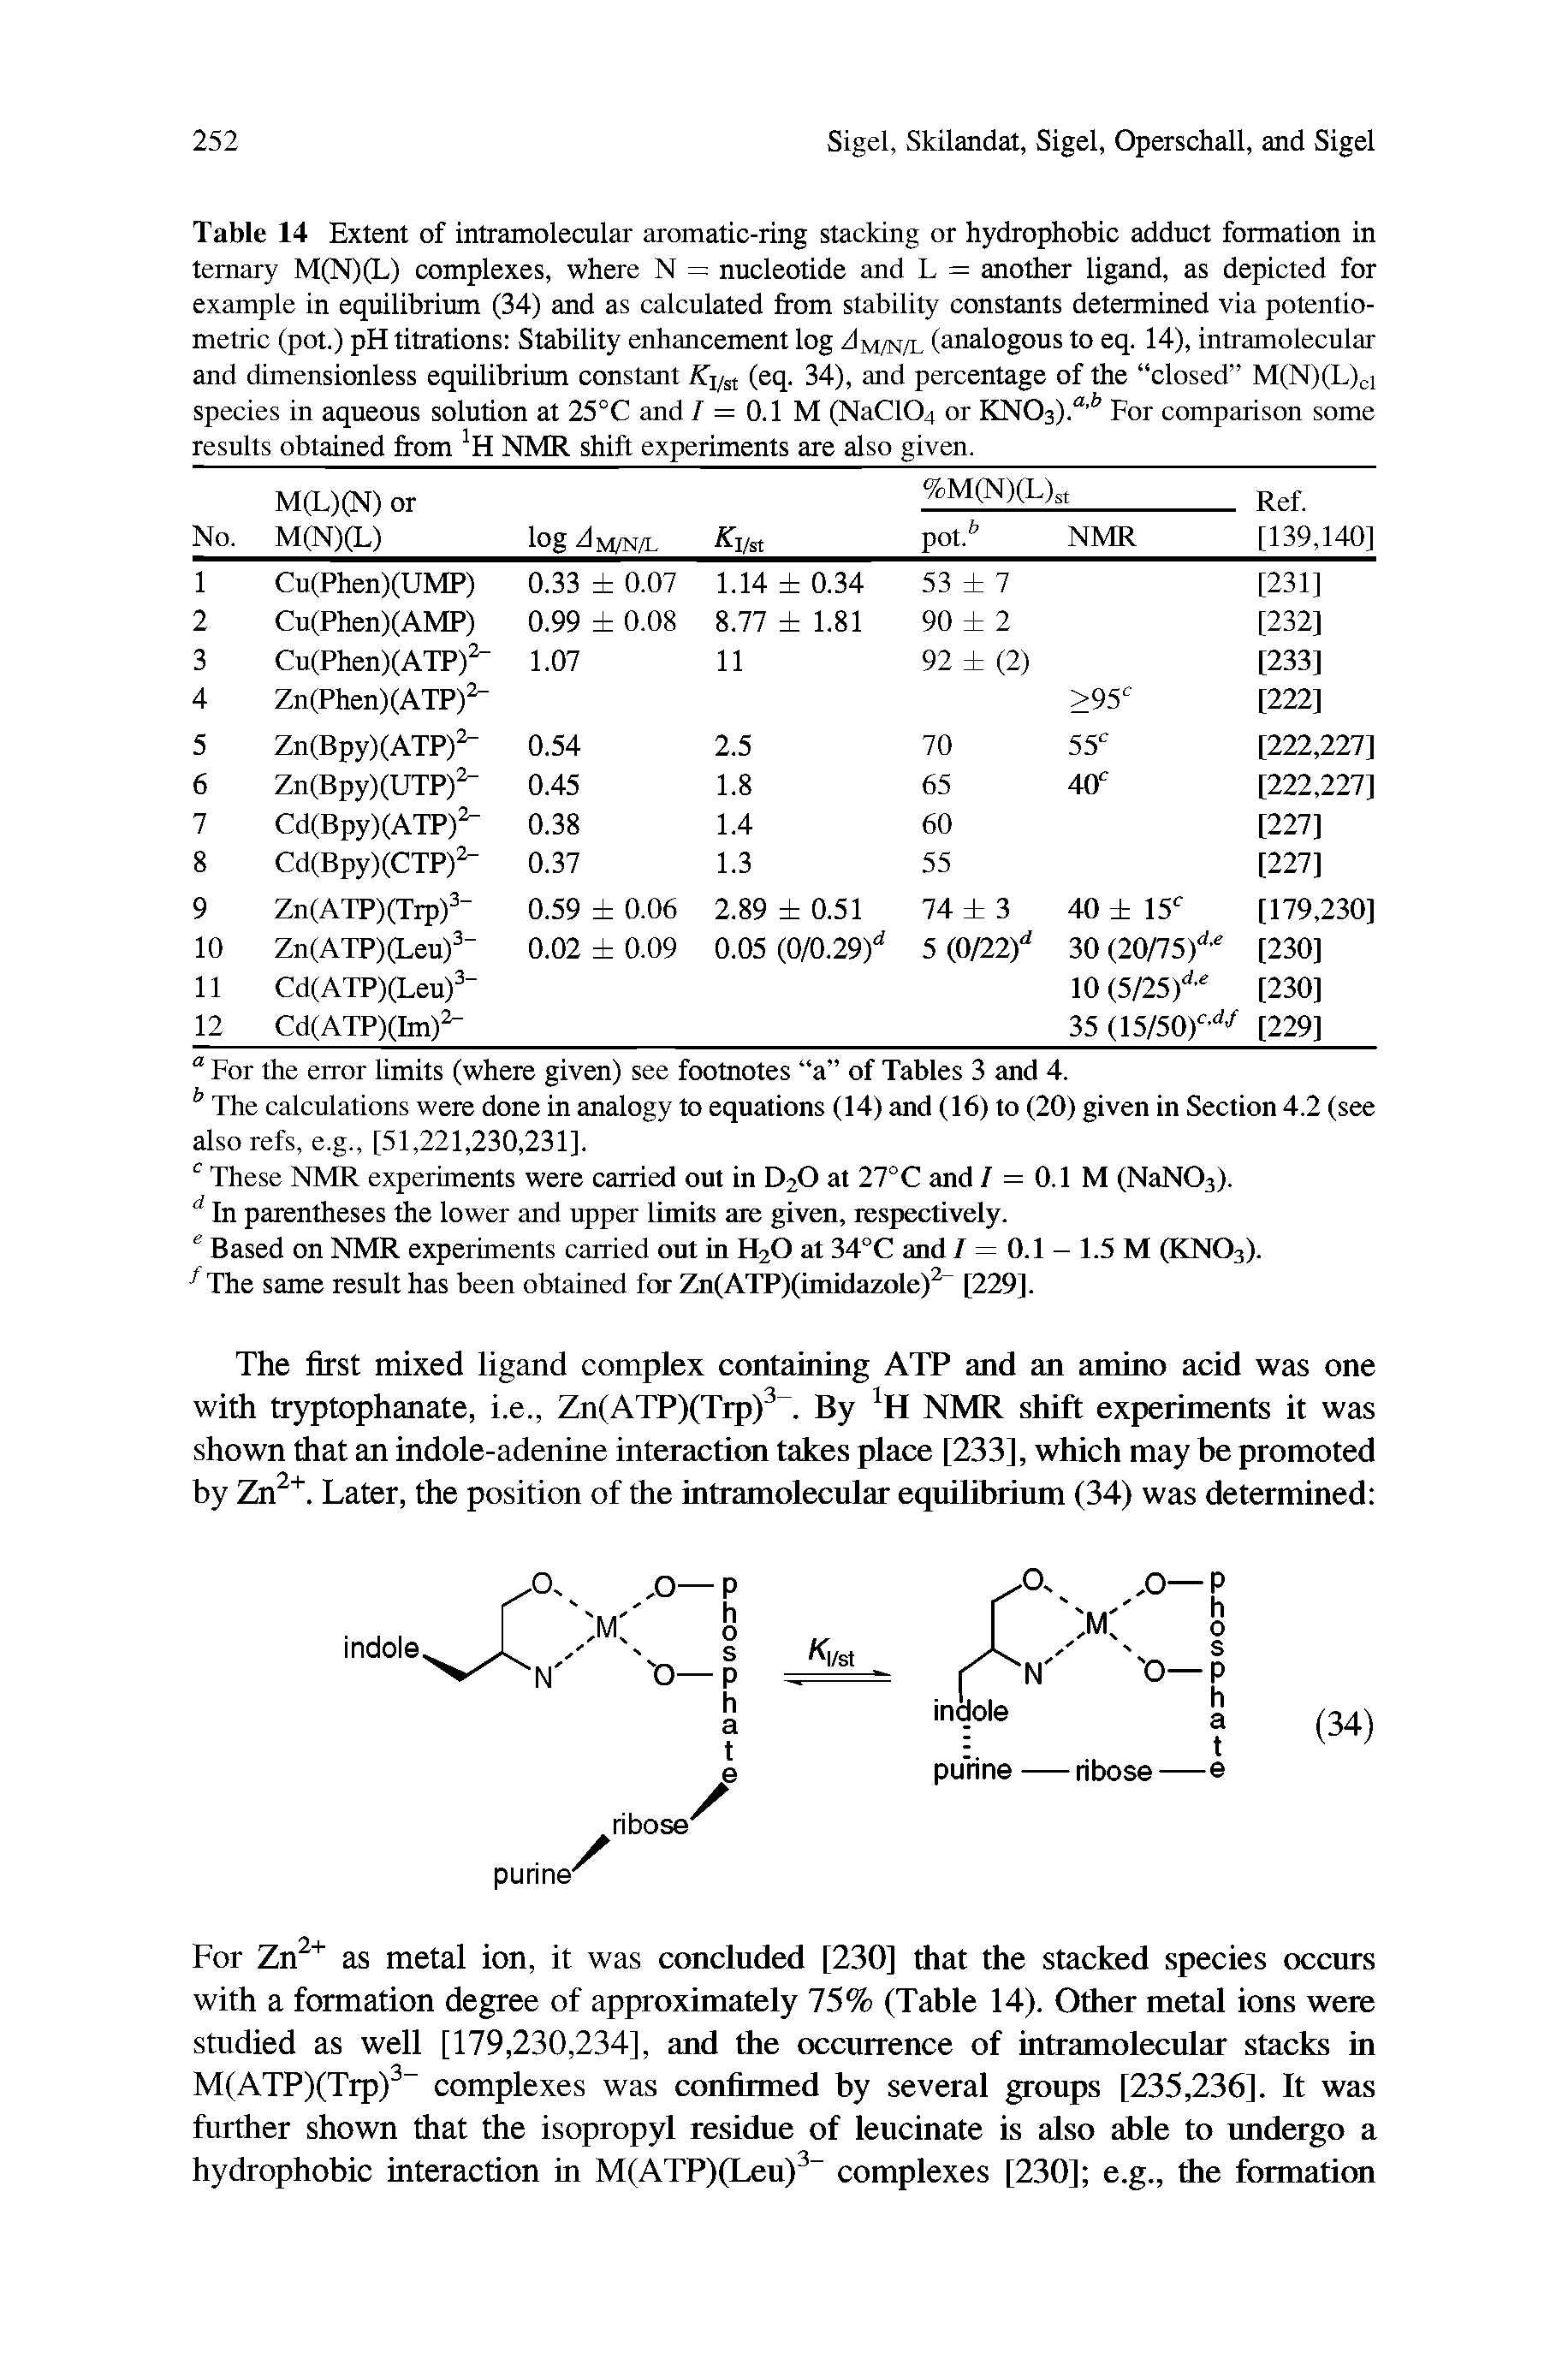 Table 14 Extent of intramolecular aromatic-ring stacking or hydrophobic adduct formation in ternary M(N)(L) complexes, where N = nucleotide and L = another ligand, as depicted for example in equilibrium (34) and as calculated from stability constants determined via potentio-metric (pot.) pH titrations Stability enhancement log zIm/n/l (analogous to eq. 14), intramolecular and dimensionless equilibrium constant Kj/st (eq. 34), and percentage of the closed M(N)(L)d species in aqueous solution at 25°C and / = 0.1 M (NaC104 or KNOs)." " For comparison some results obtained from H NMR shift experiments are also given.